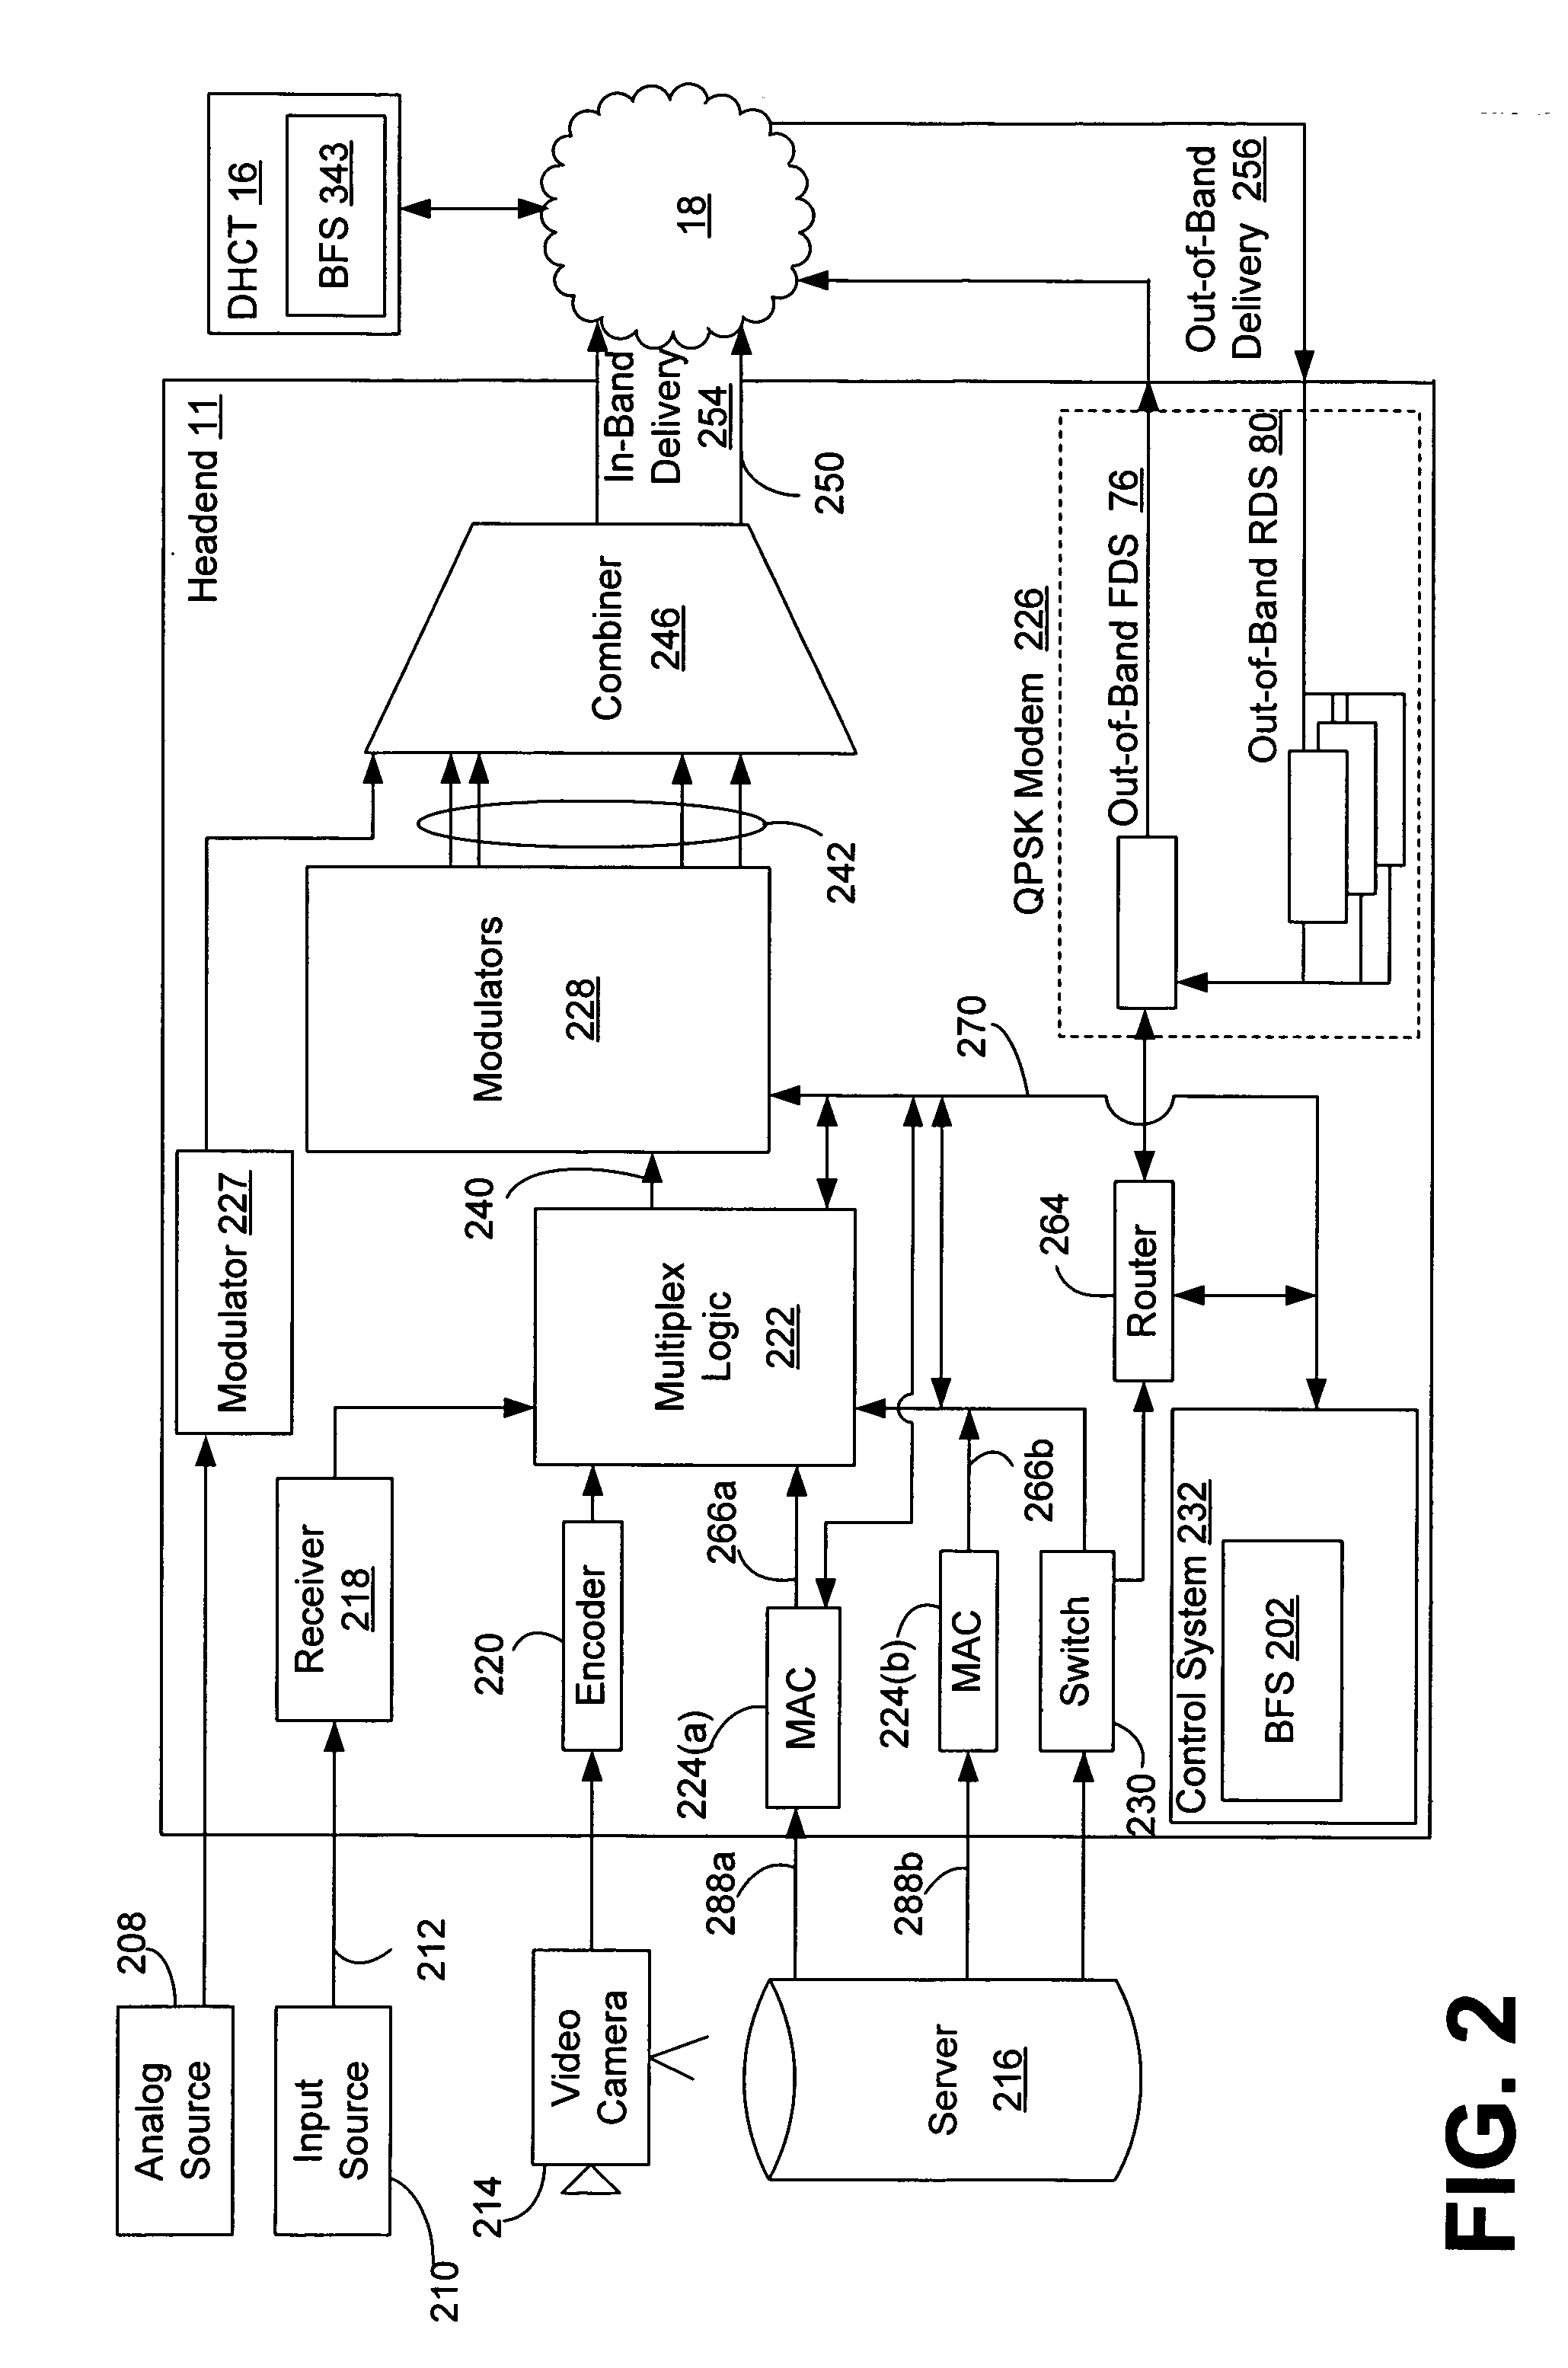 Interactive discovery of display device characteristics